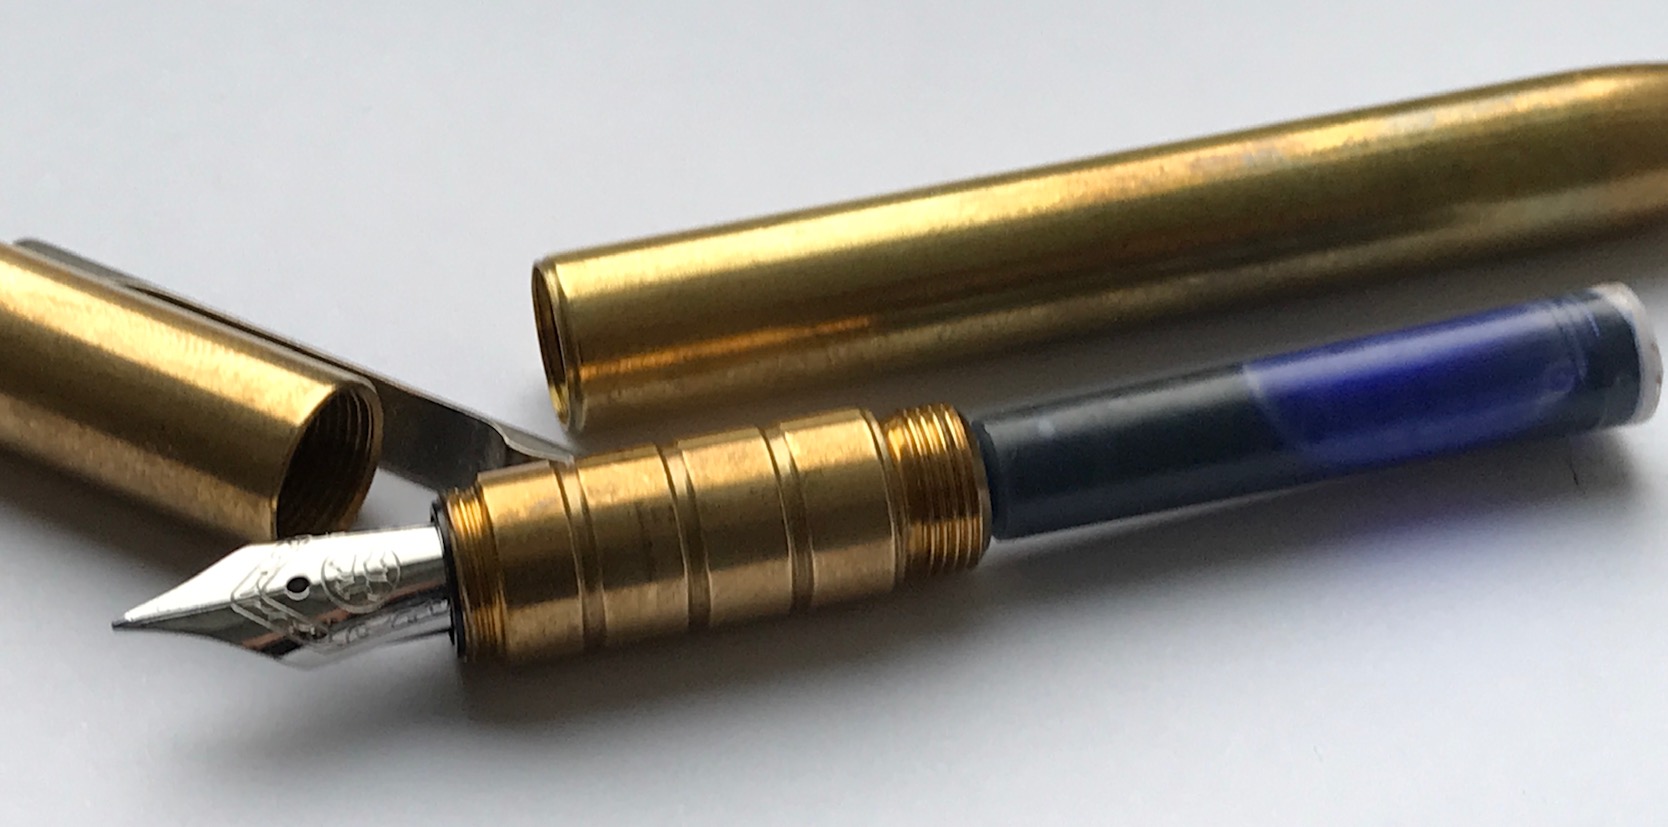 Brass Pens - Everything You Needed to Know - Goldspot Pens